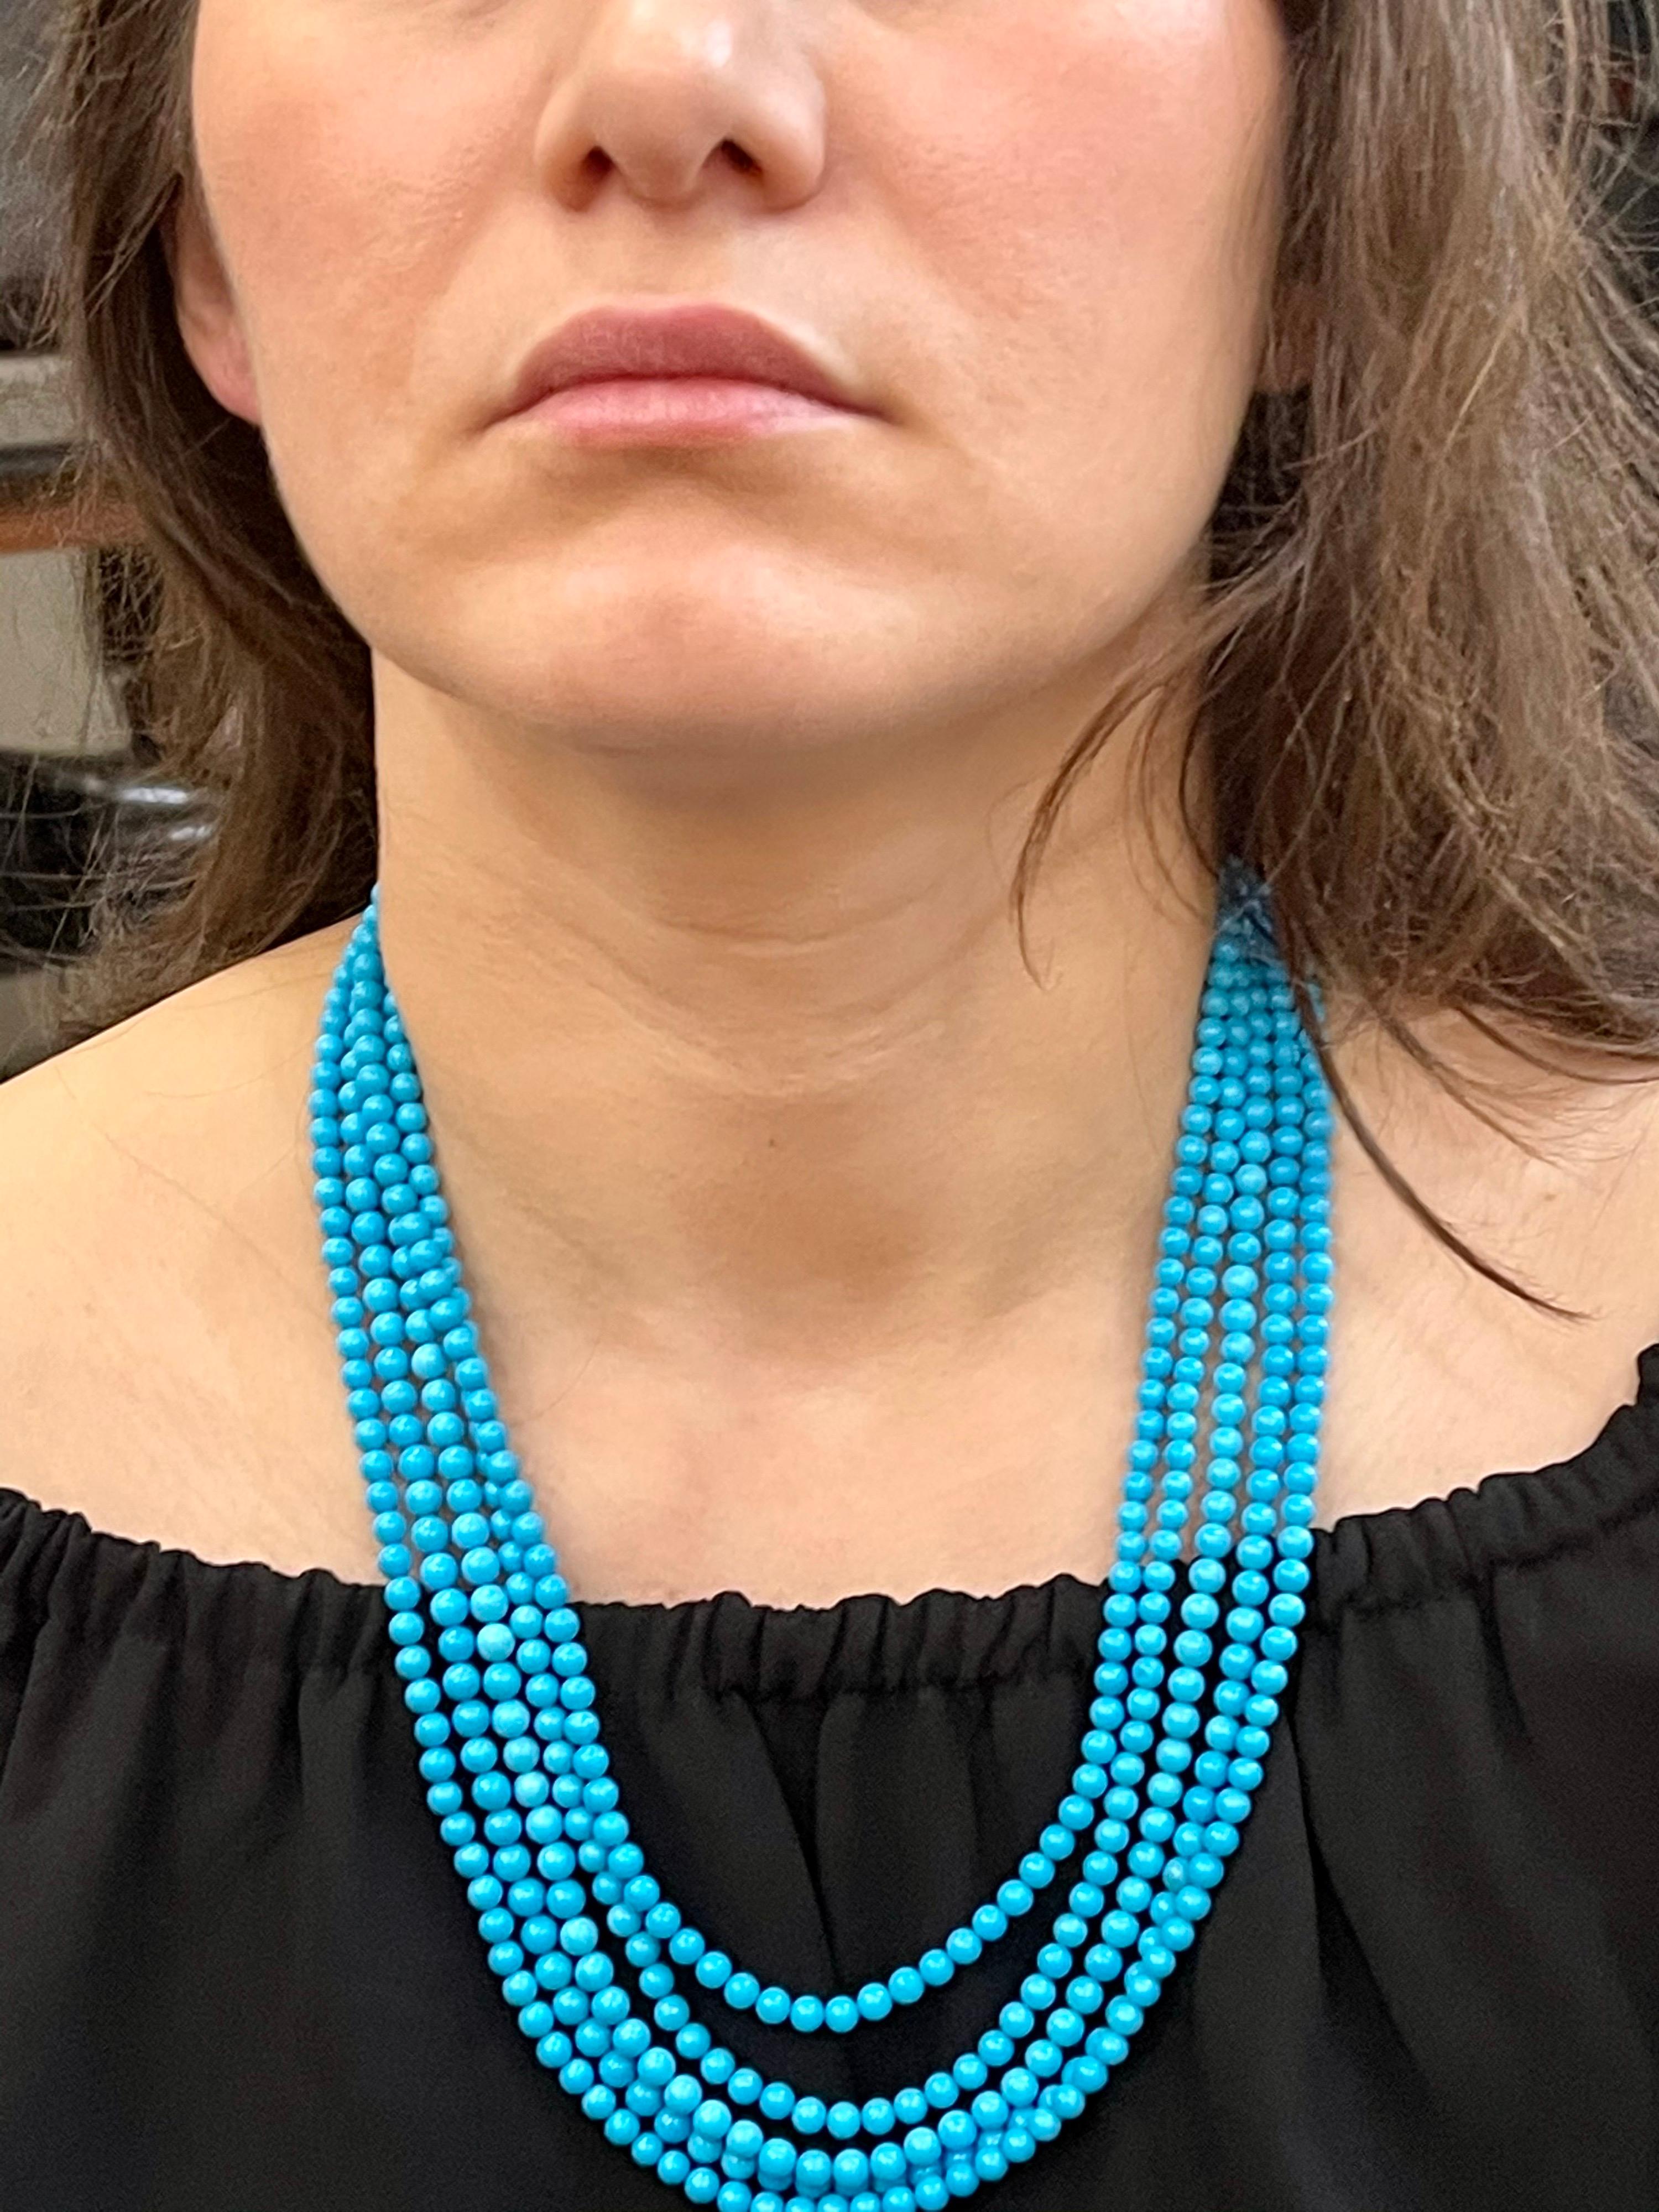 465 Carat Natural Sleeping Beauty Turquoise Necklace, Multi Strand 18 Karat Gold For Sale 4